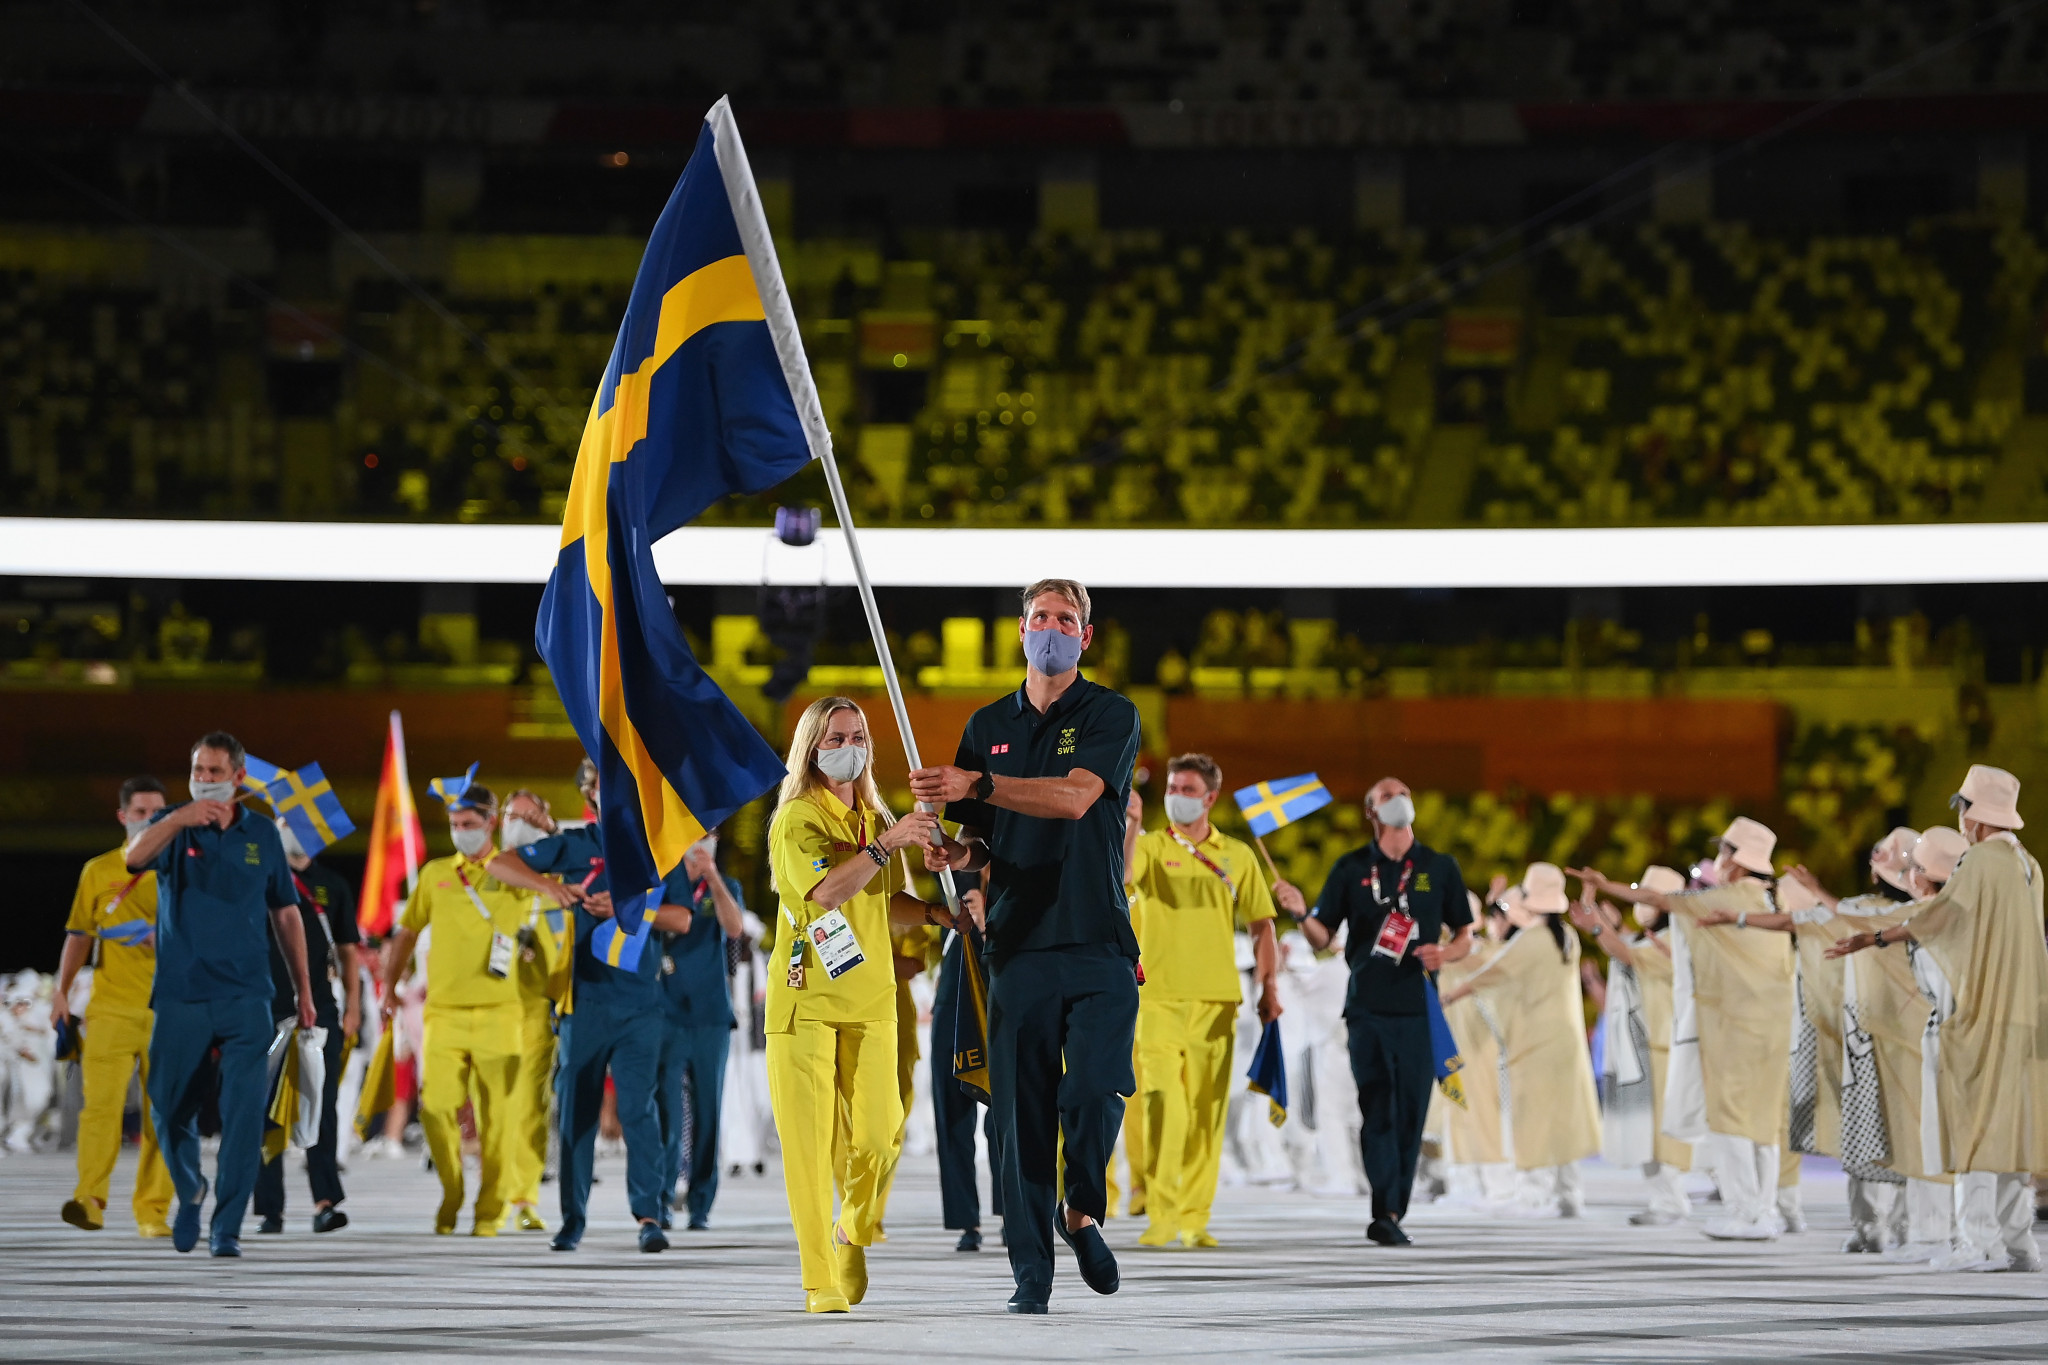 Sweden place Vangdal in charge of coaching drive before Paris 2024 